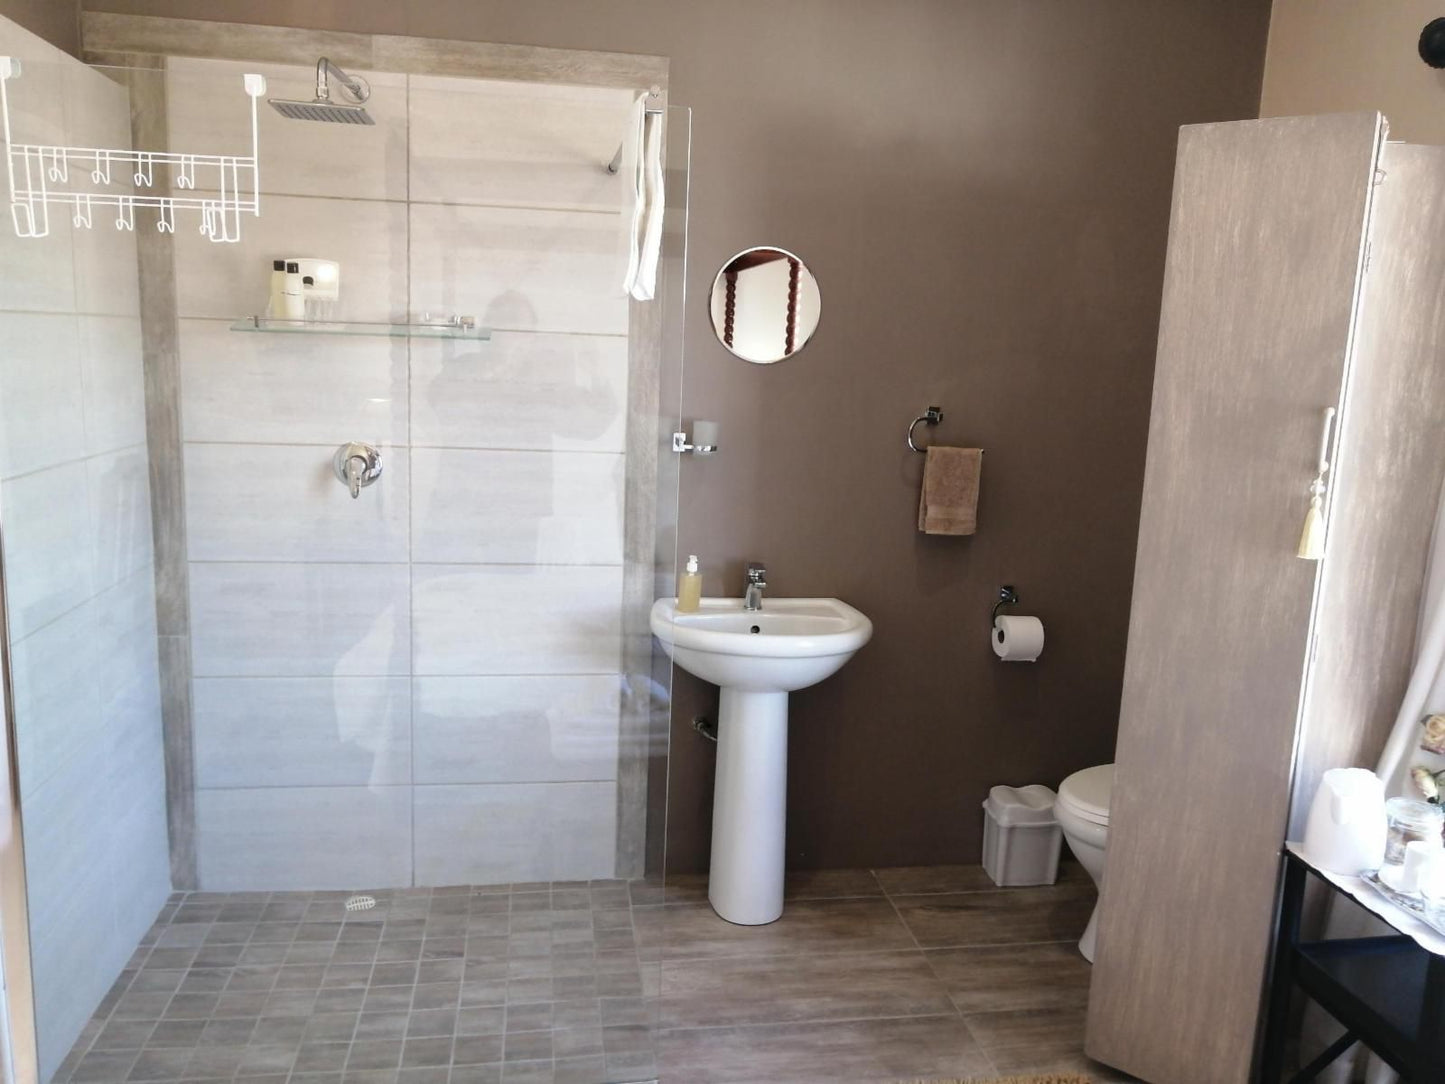 At 29 Columba Great Brak River Western Cape South Africa Bathroom